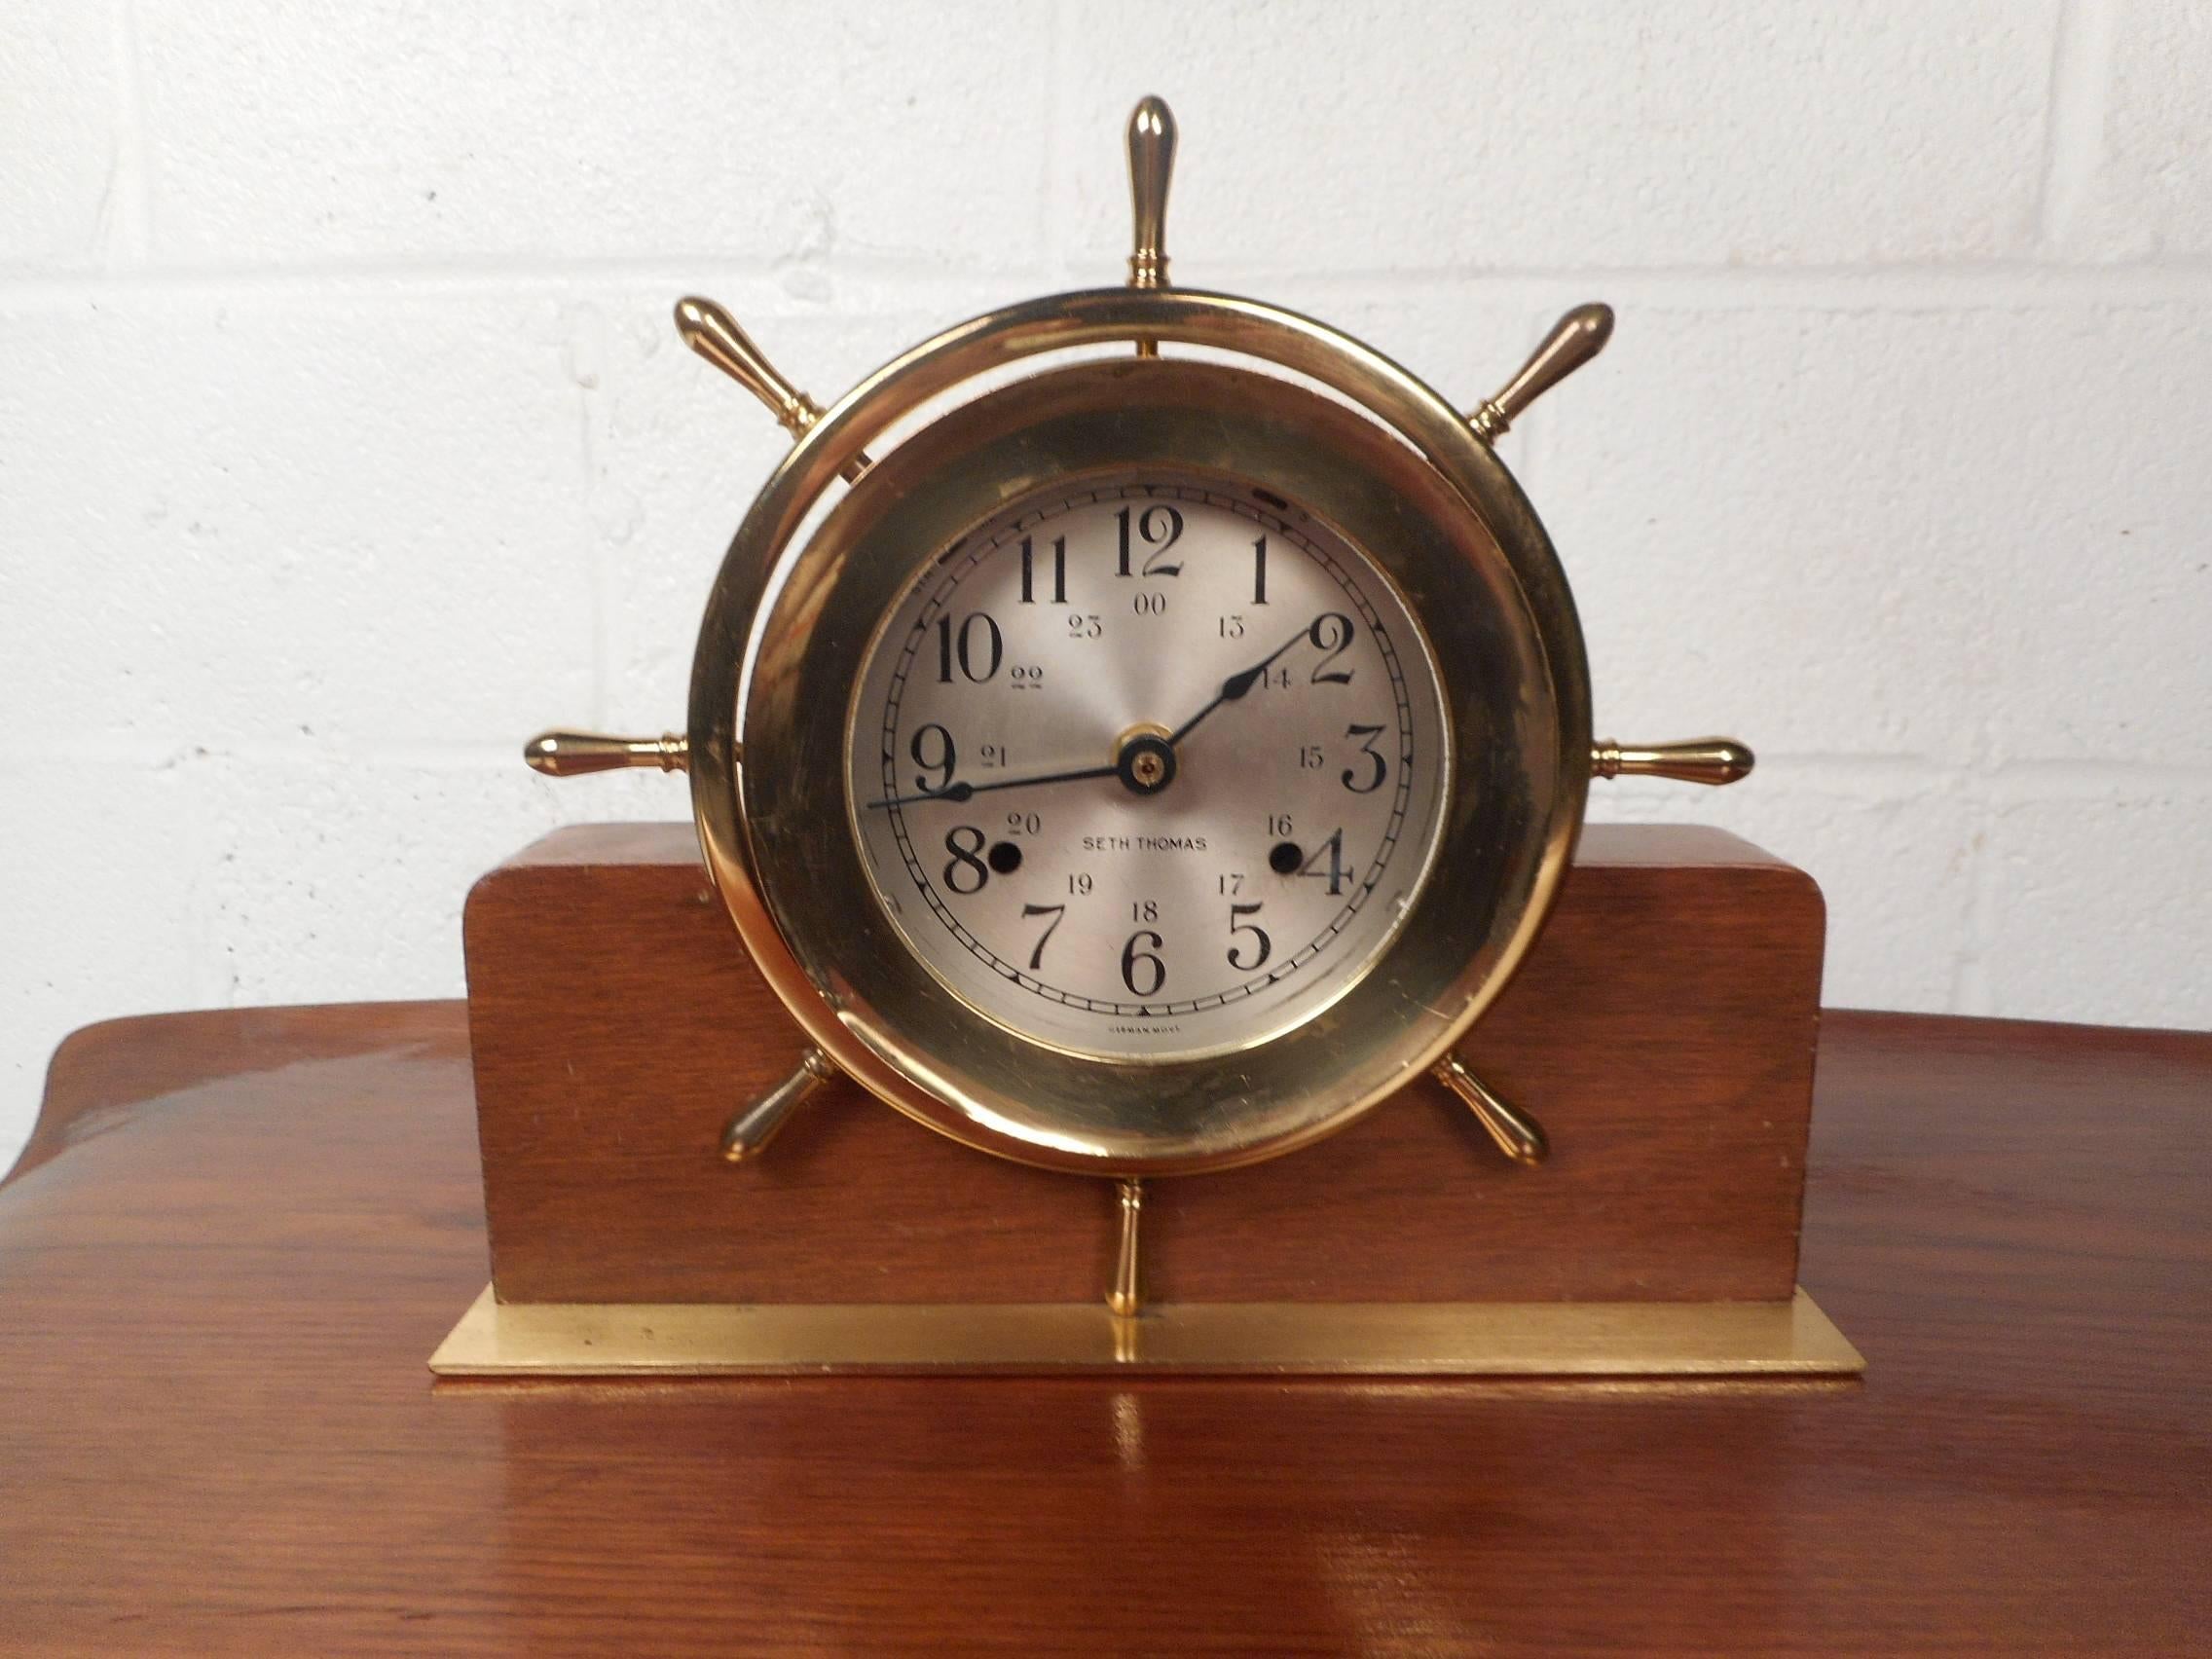 This beautiful vintage clock by Seth Thomas looks incredible on top of the mantel. Wonderful two-tone design made of brass and wood. The unusual ship wheel design and flat brass base show quality. This stunning clock makes the perfect eye catching